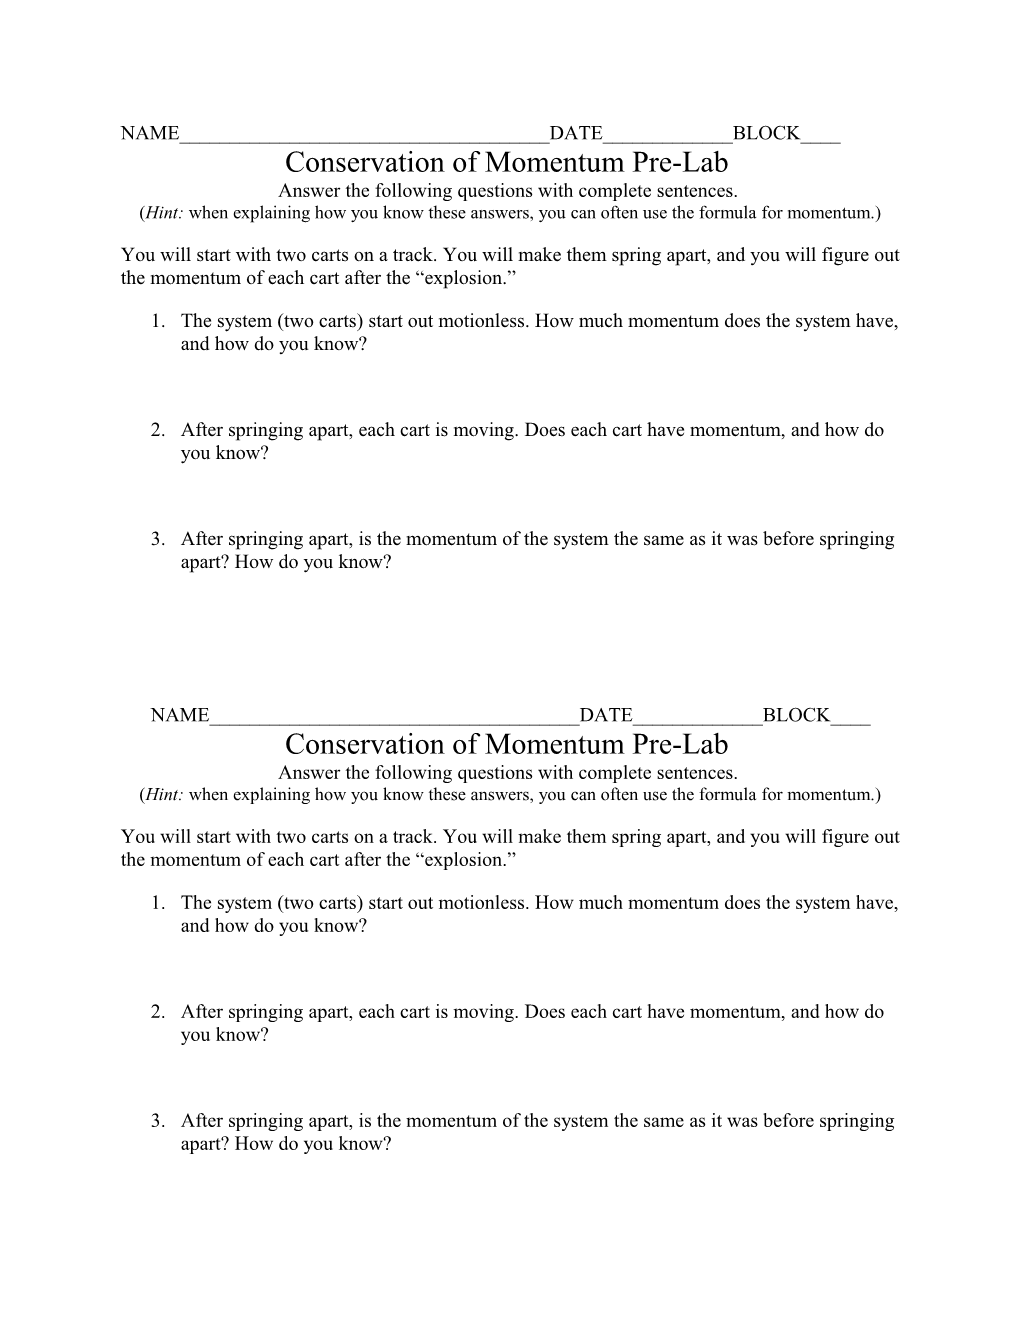 Conservation of Momentum Pre-Lab Answer the Following Questions with Complete Sentences